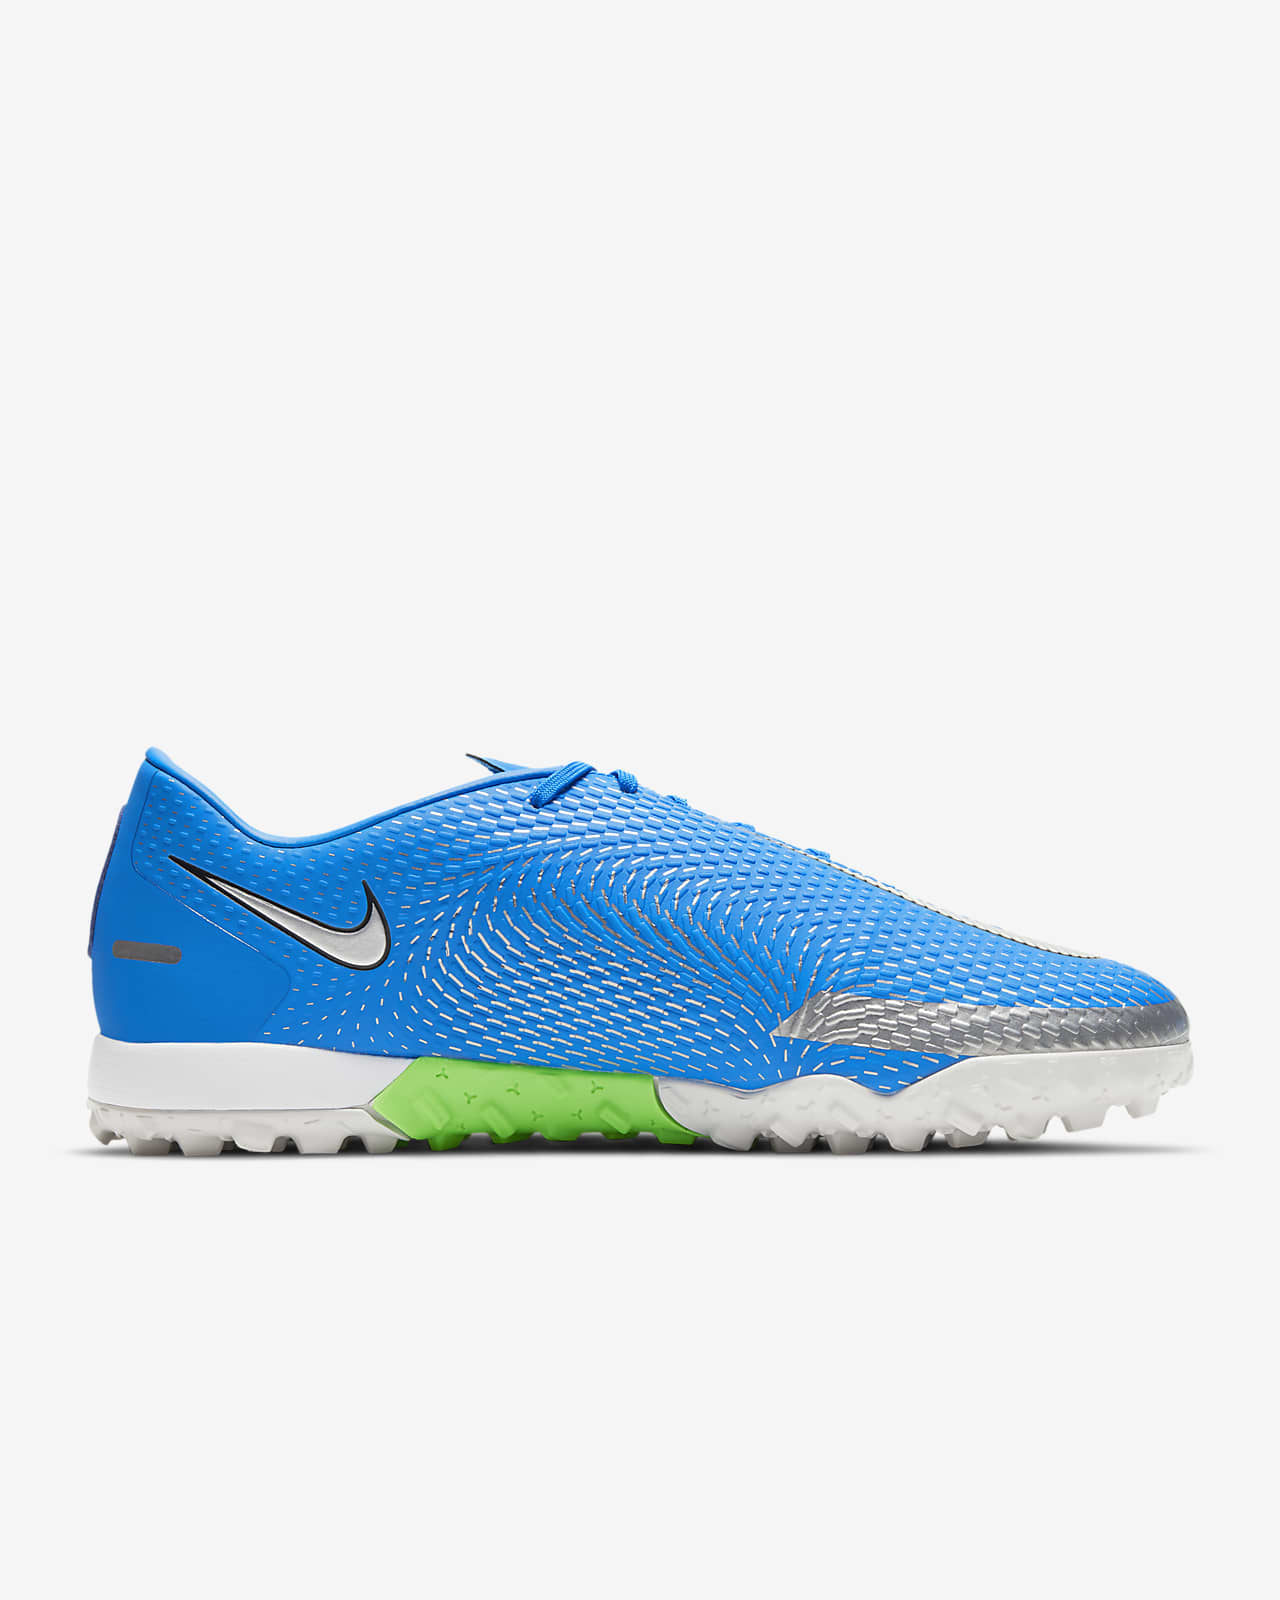 nike artificial turf soccer cleats